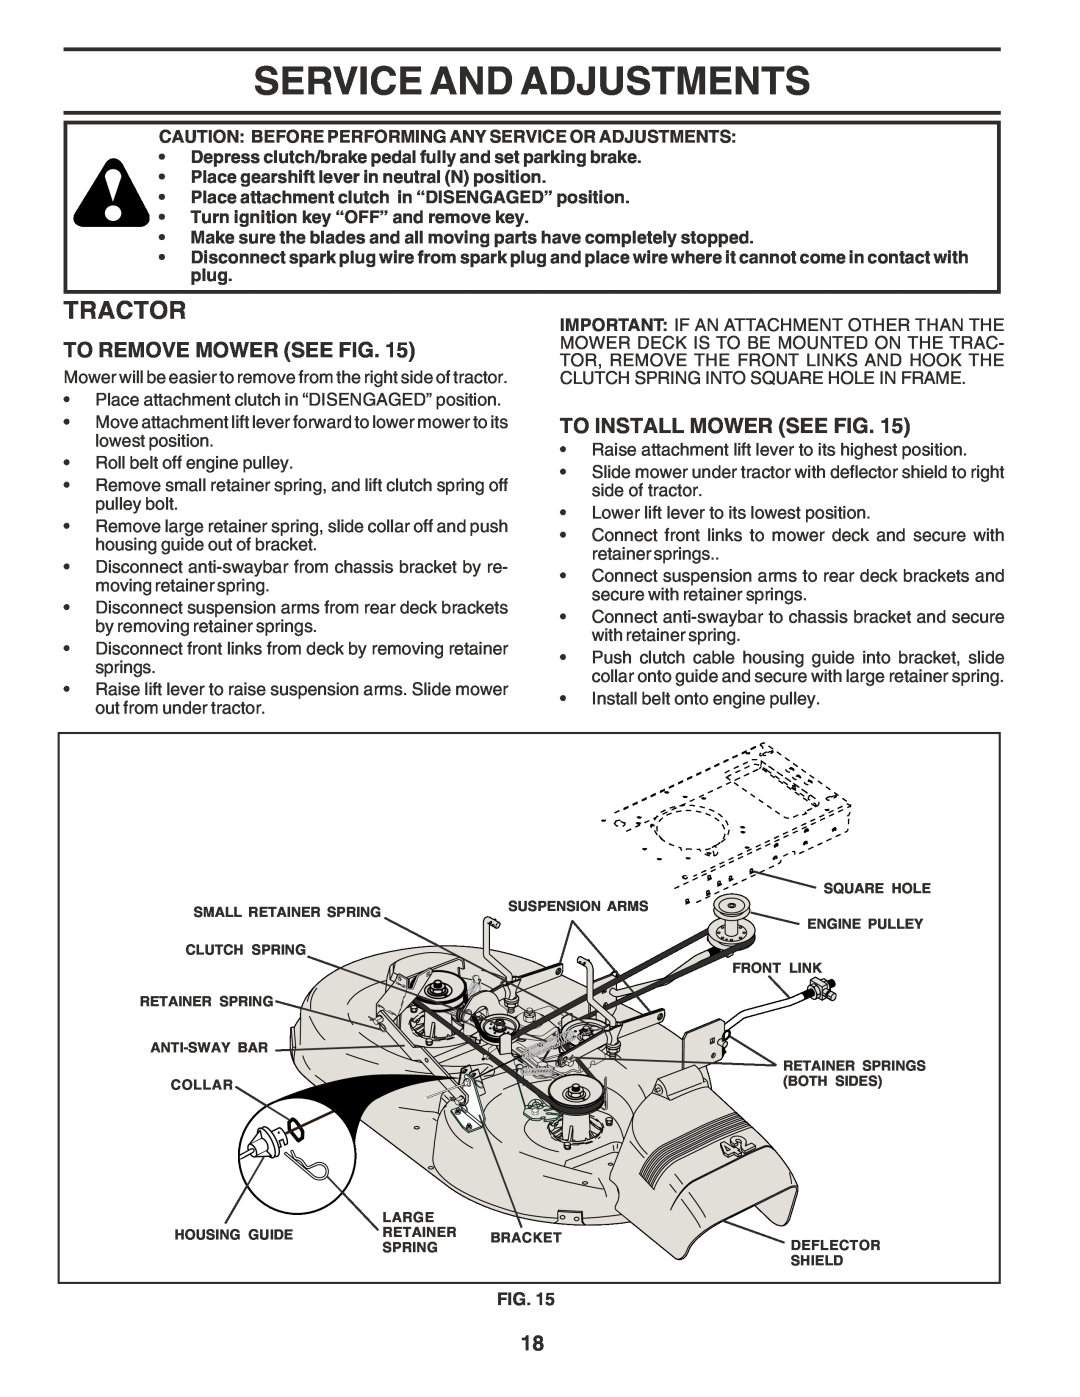 Poulan 180196 owner manual Service And Adjustments, To Remove Mower See Fig, To Install Mower See Fig, Tractor 